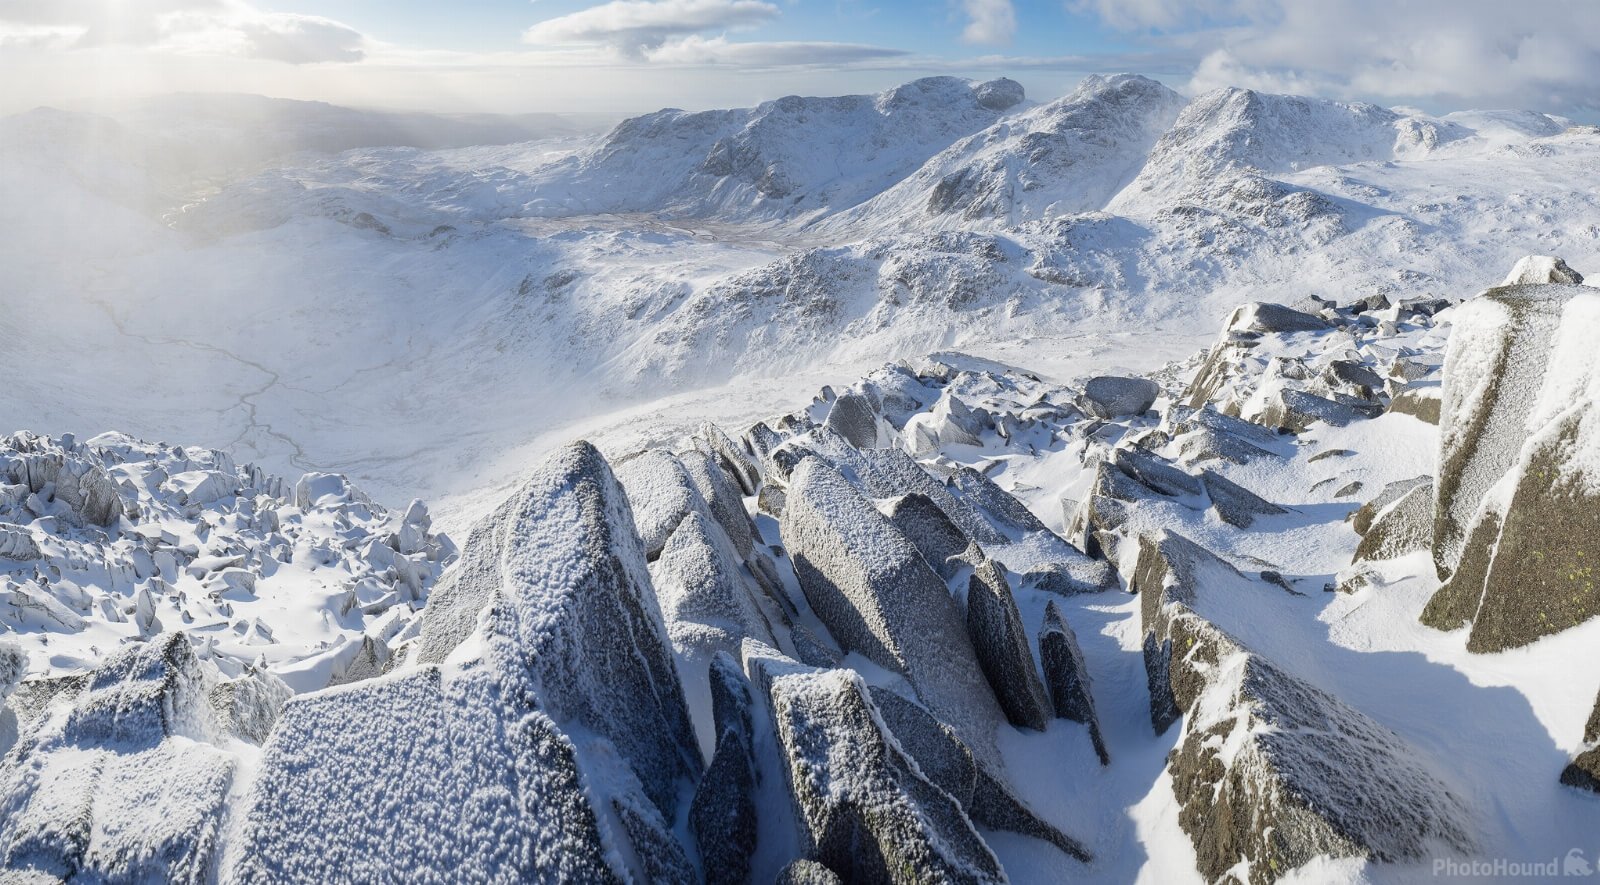 Image of Bowfell (Bow Fell) by James Grant